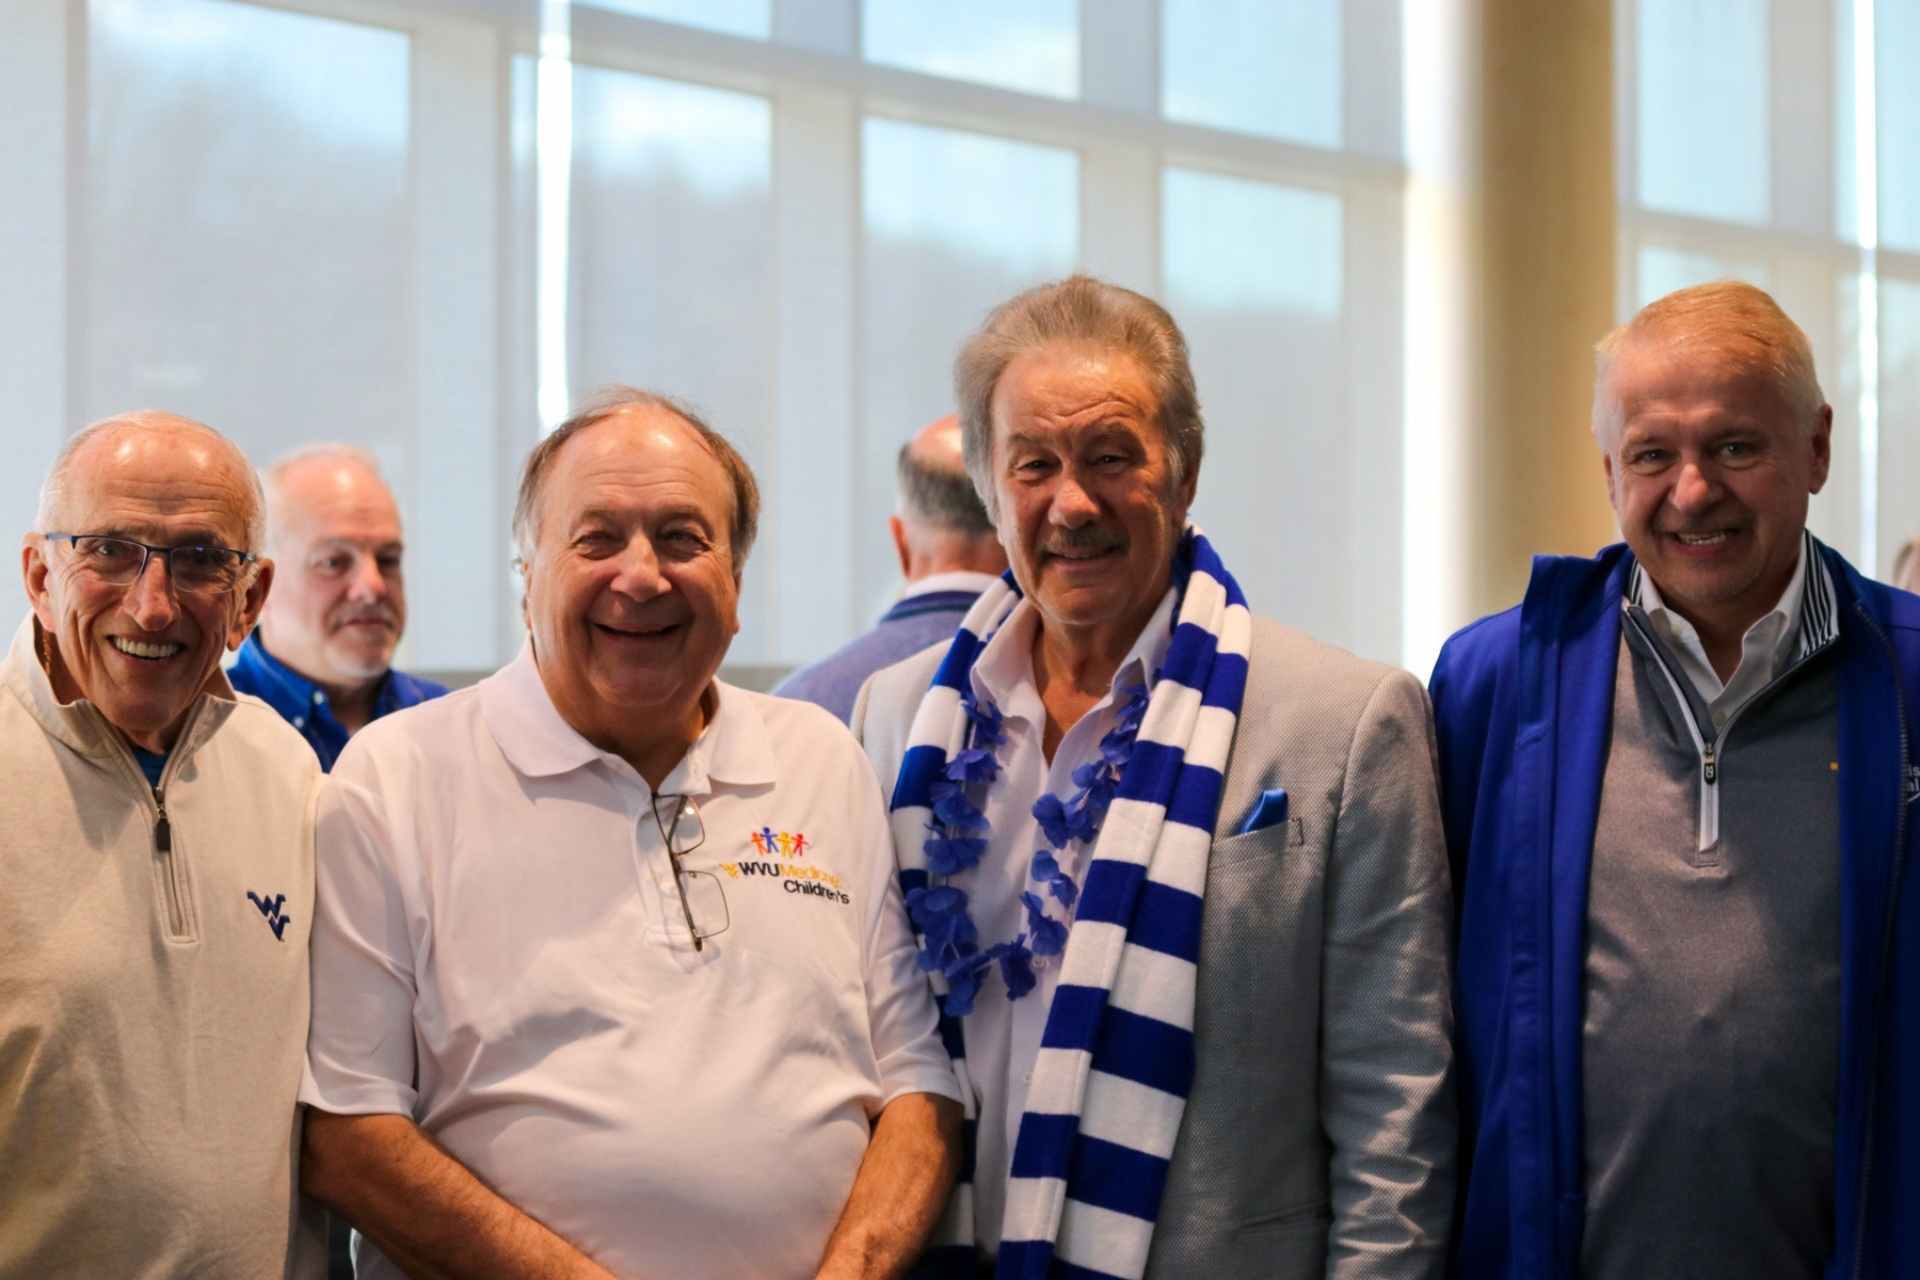 On Saturday, February 19, Glenville State College saw two significate milestones reached: the 150th anniversary of the College’s founding and over $1.1 million raised for the annual Founders Day of Giving campaign. Pictured here are (l-r) I.L. “Ike” Morris, Rodney LeRose, Dr. Mark Manchin, and Steve Westfall.